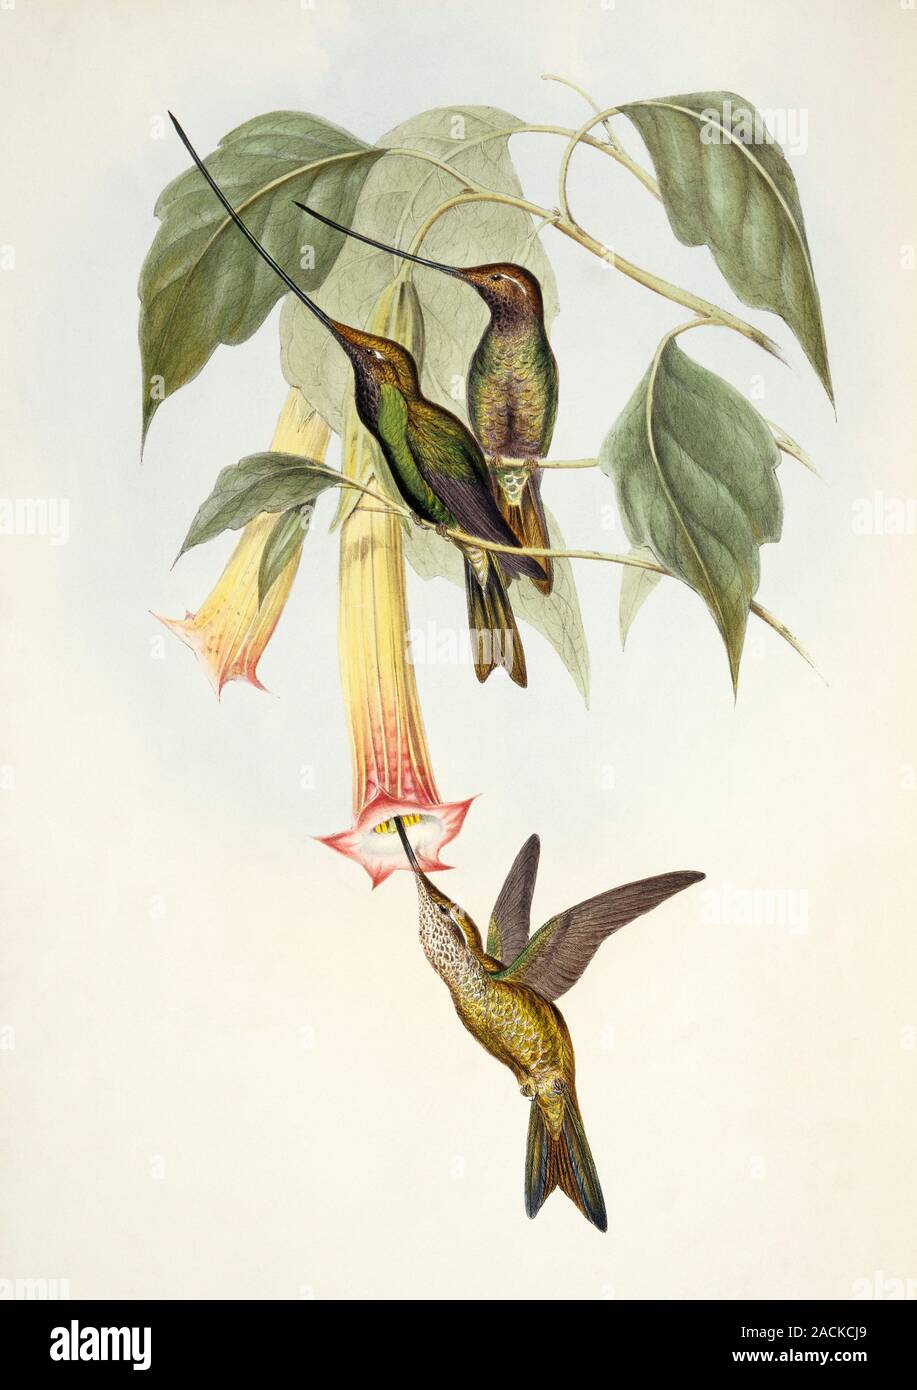 Sword-billed hummingbirds (Ensifera ensifera). Illustration from an 1861 supplementary volume of 'A Monograph of the Trochilidae, or Family of Humming Stock Photo